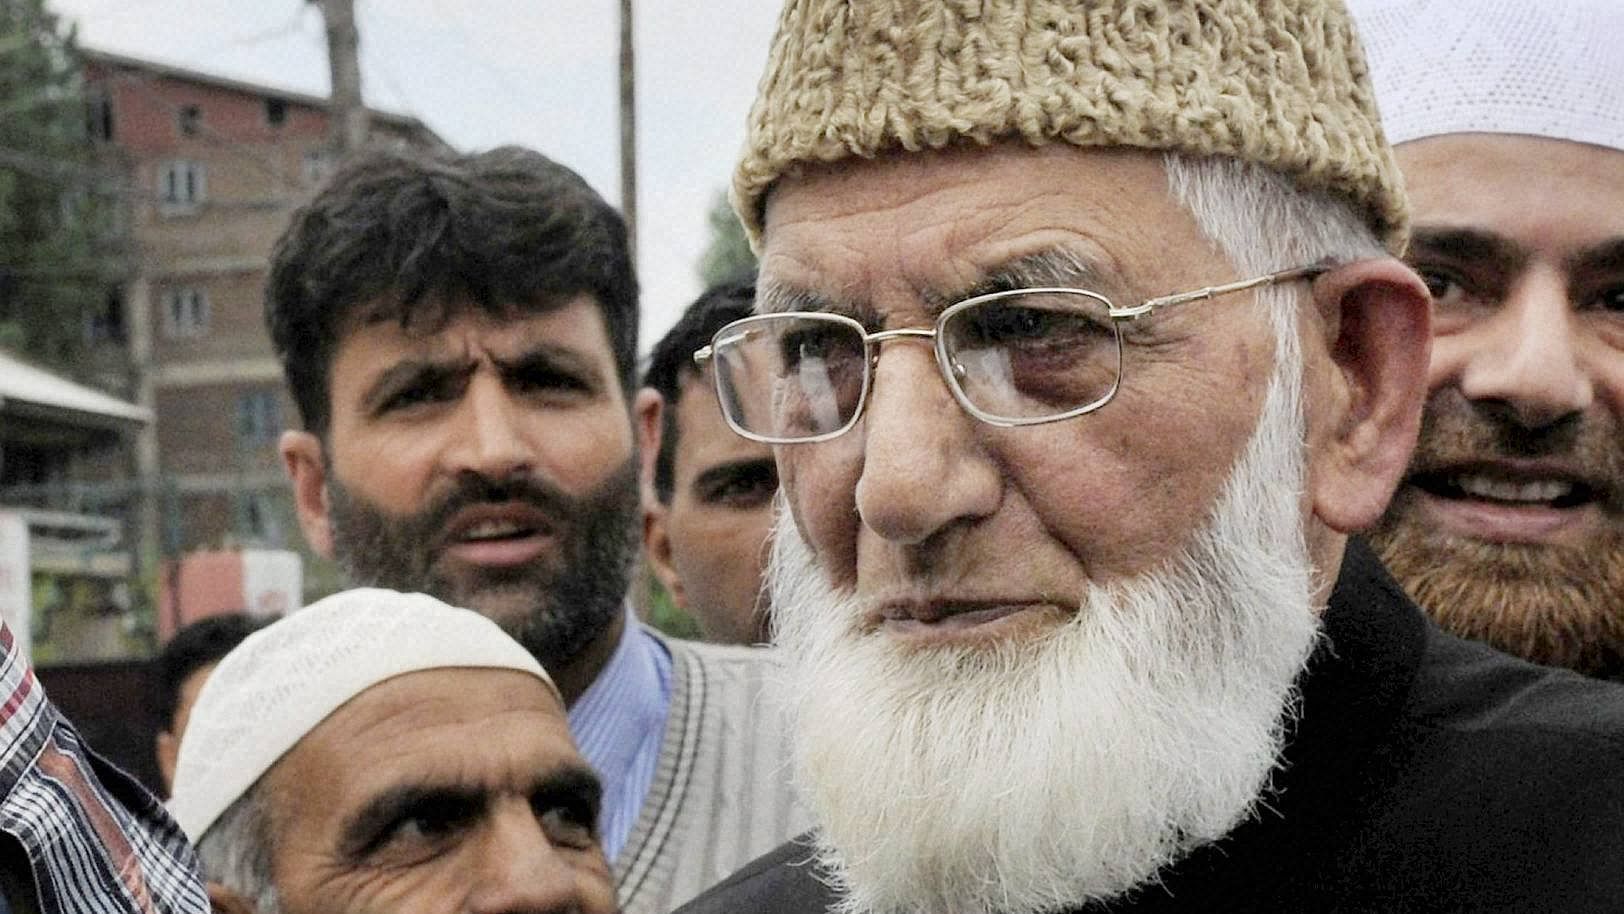 The questioning comes after NIA named Kashmiri separatist Syed Ali Shah Geelani in a Preliminary Enquiry (PE). File photo of Hurriyat leader Syed Ali Shah Geelani. (Photo: PTI)